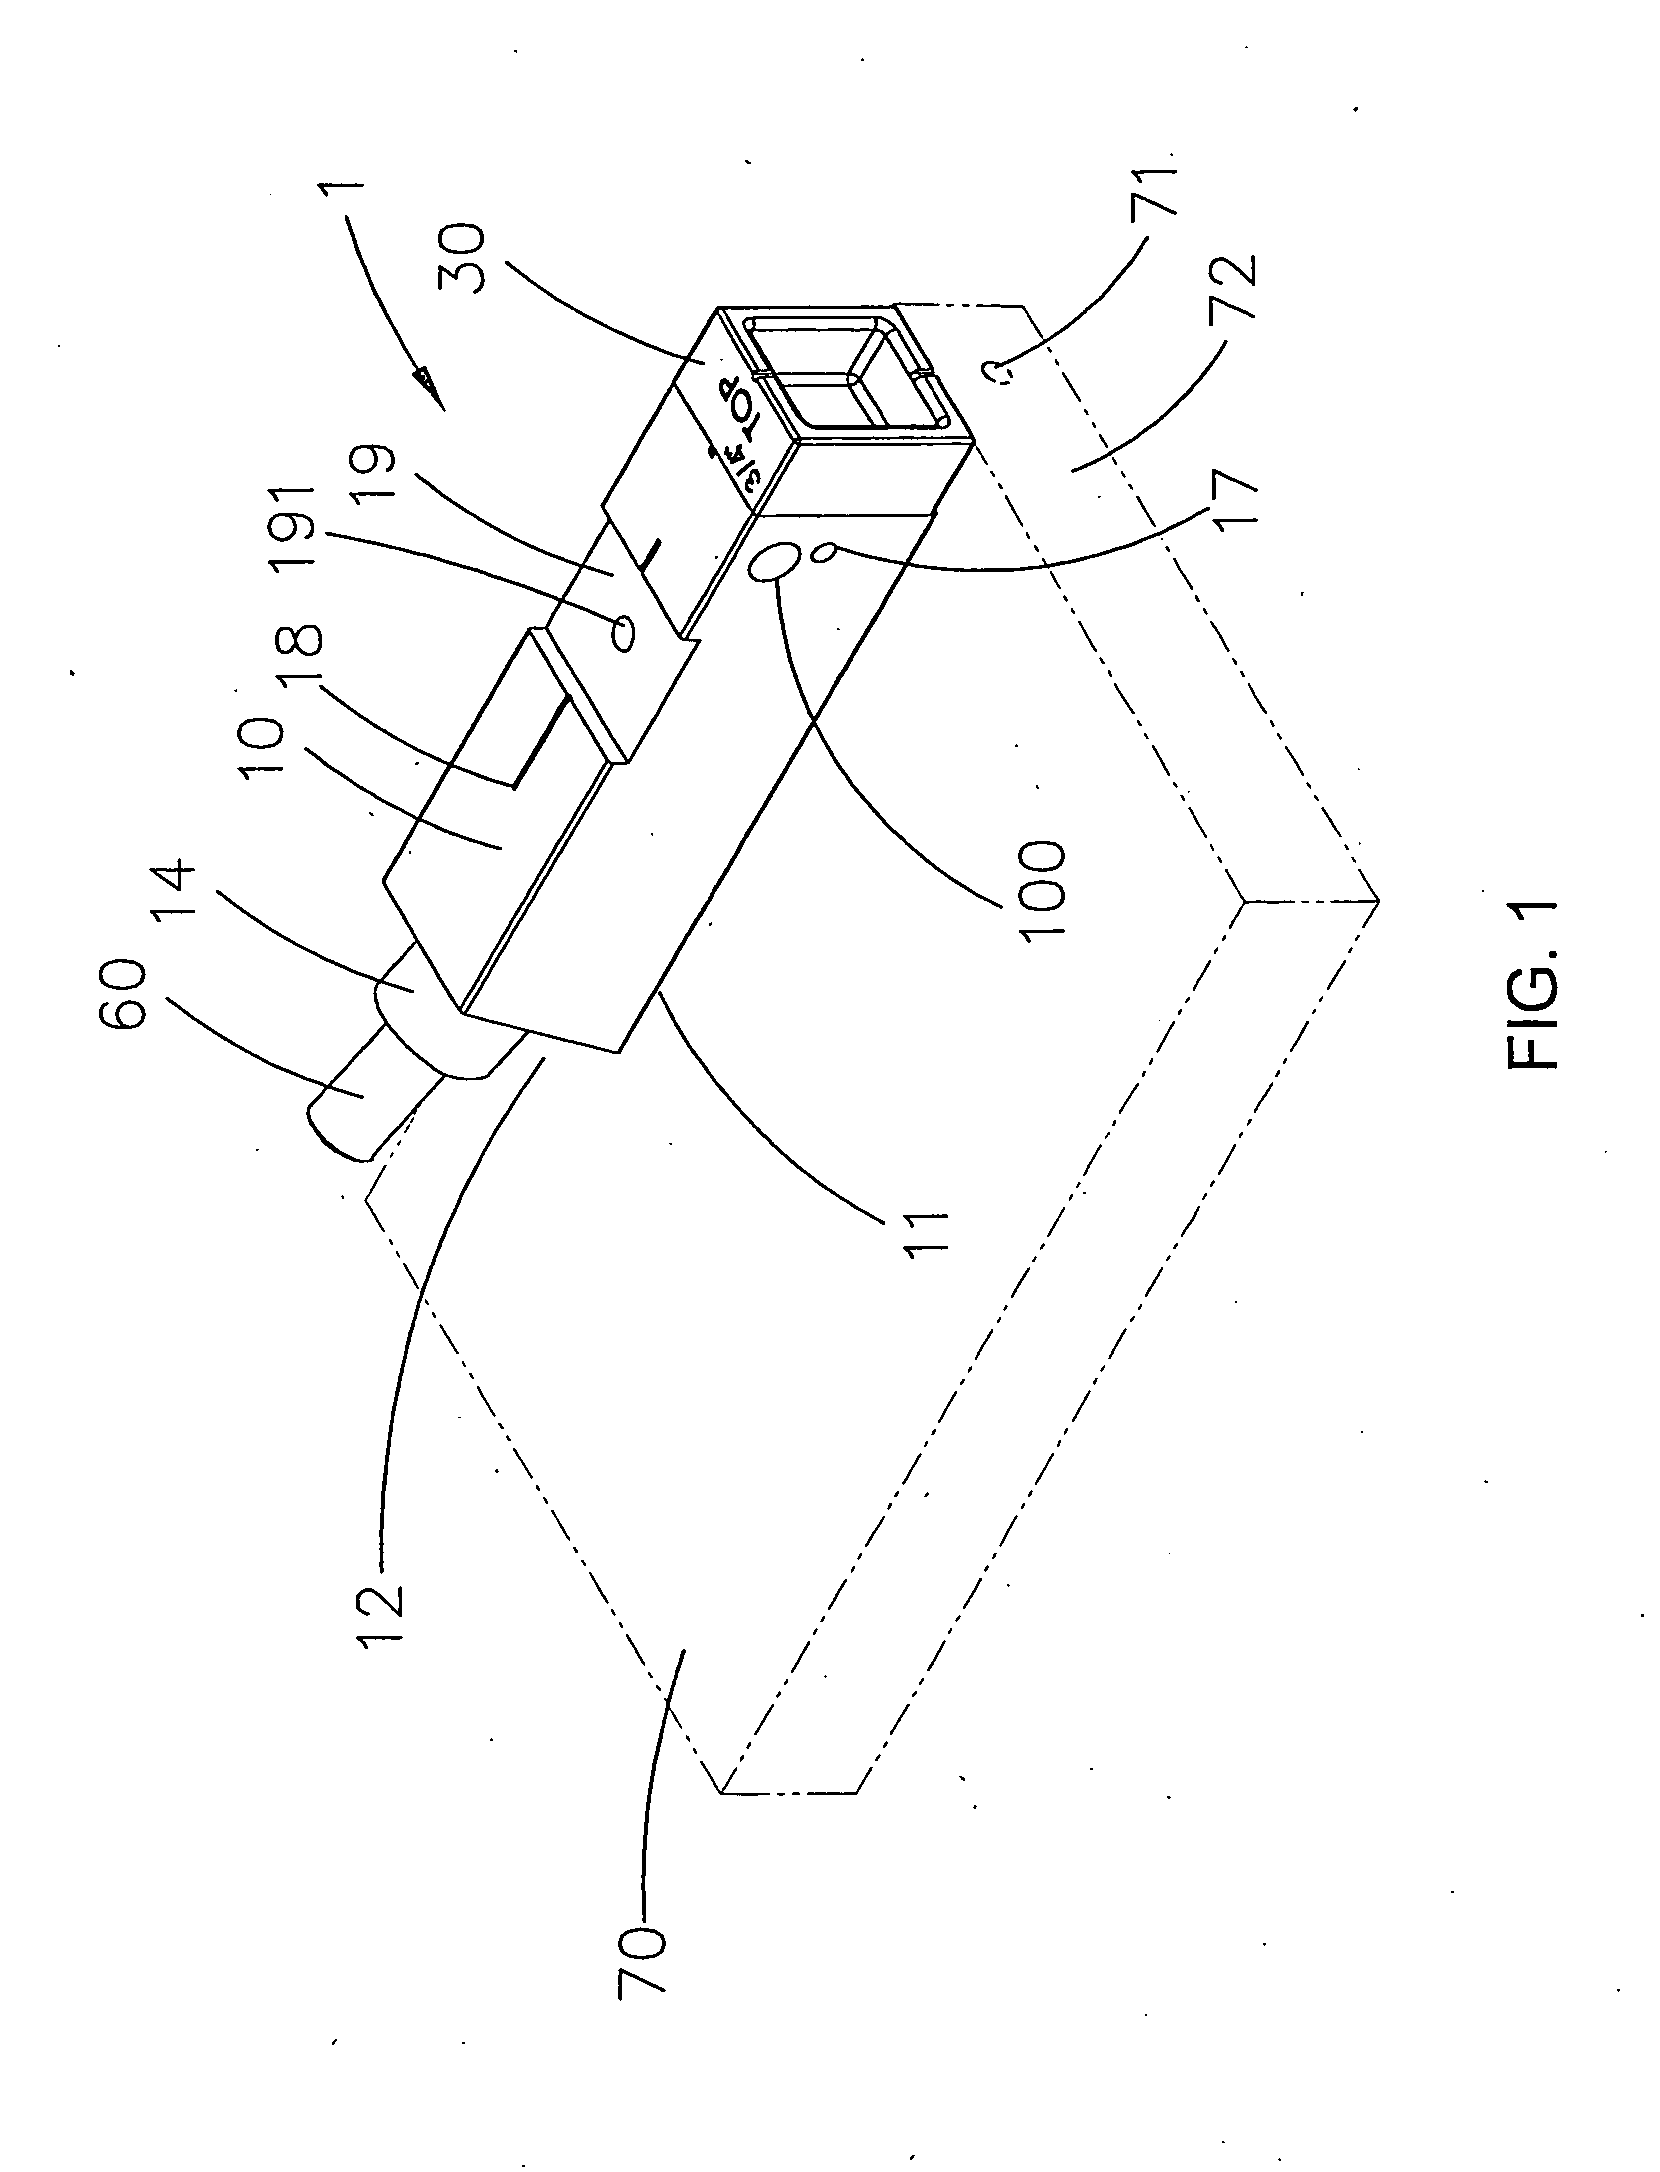 Drill guide used in woodworking for preparing pocket joints